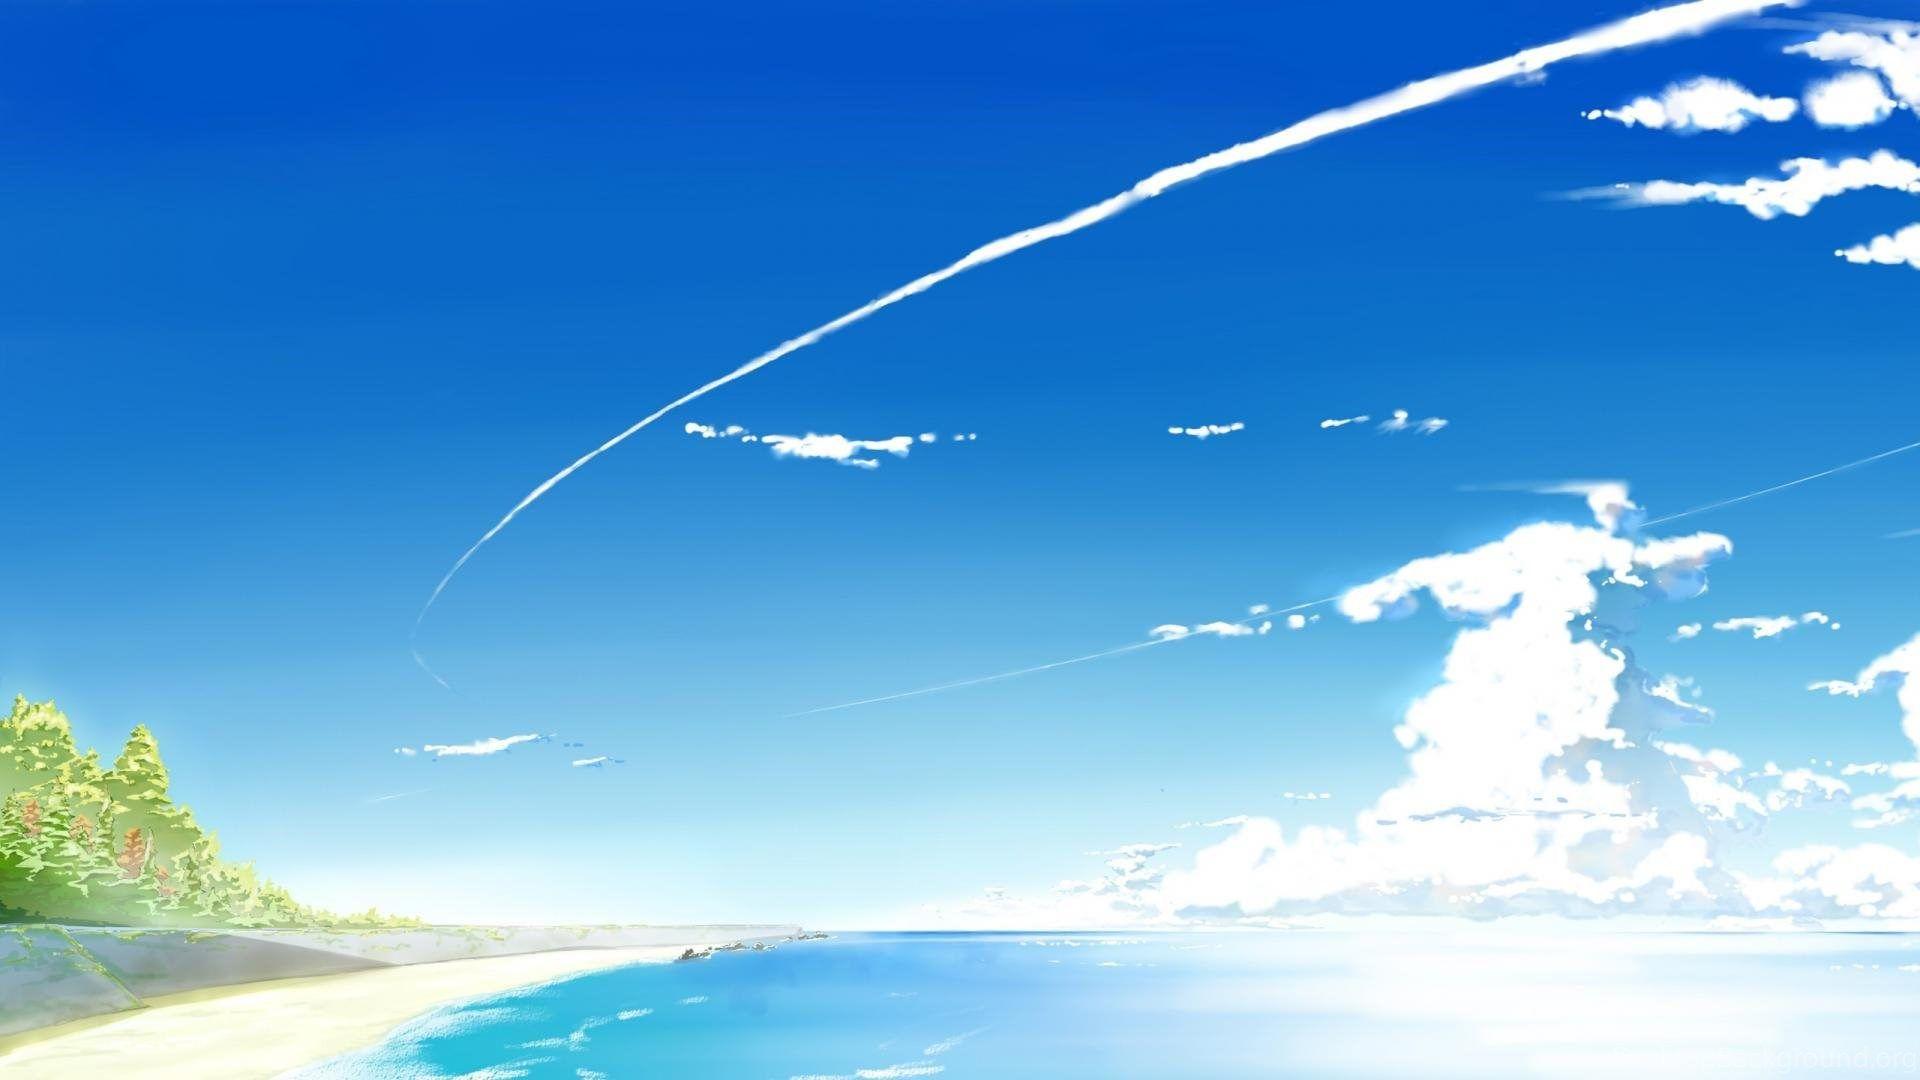 Cool 500+ Underwater background Anime Full HD free download